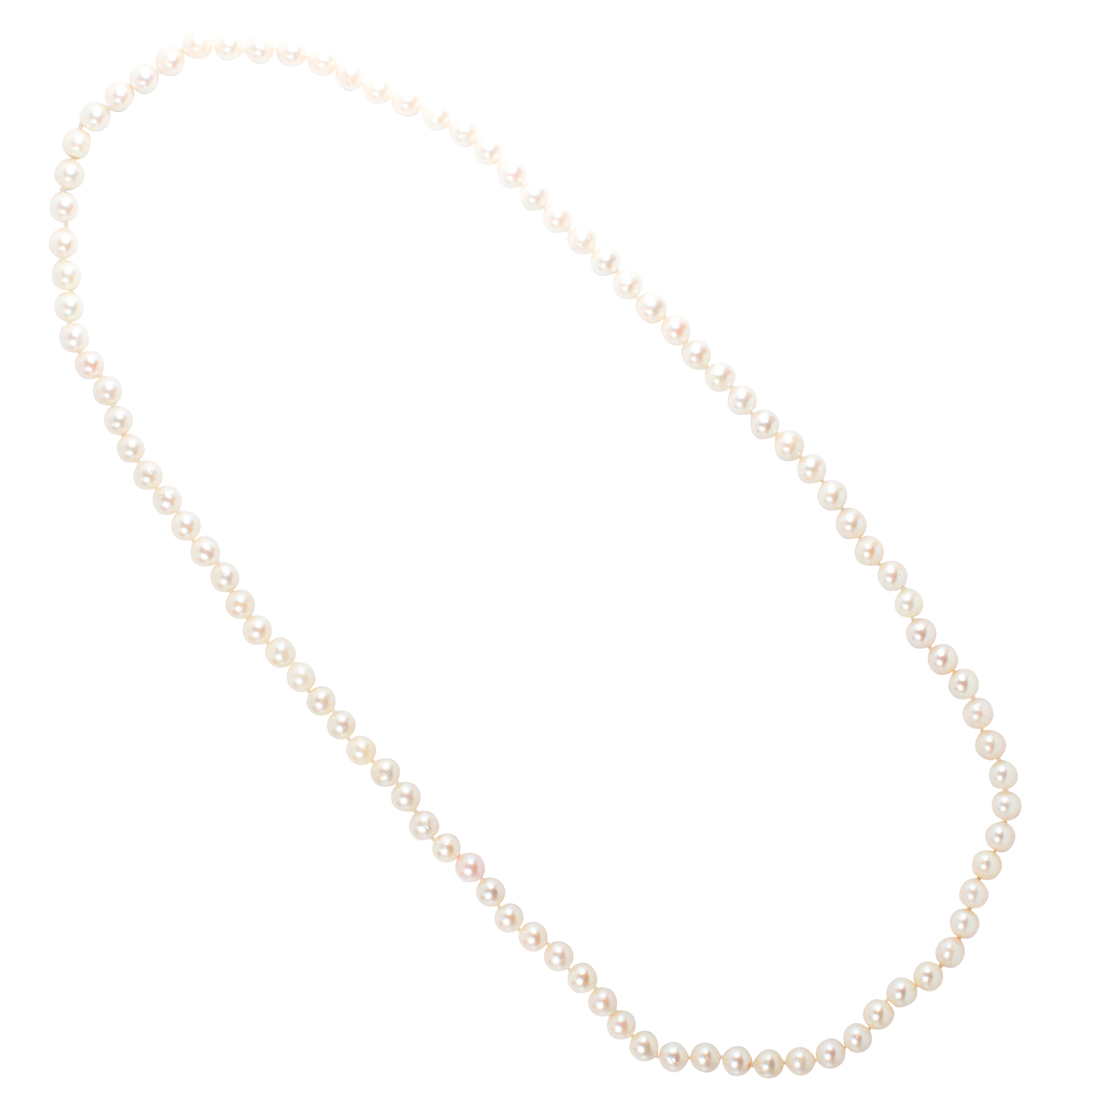 AN ENDLESS STRAND OF CULTURED PEARLS